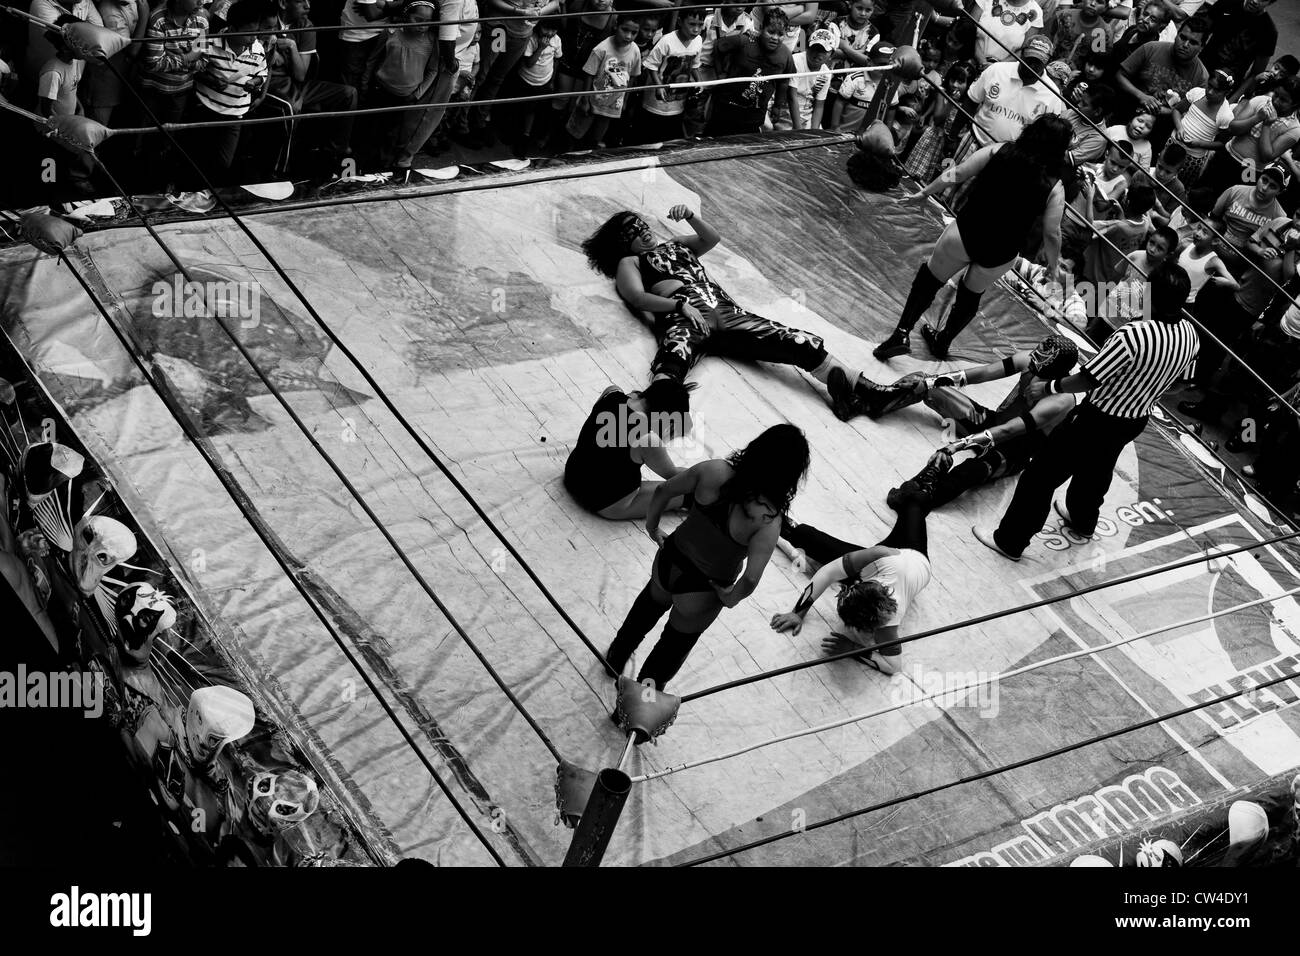 Female Lucha libre wrestlers fight during a mixed-sex performance at a local arena in Mexico City, Mexico Stock Photo picture